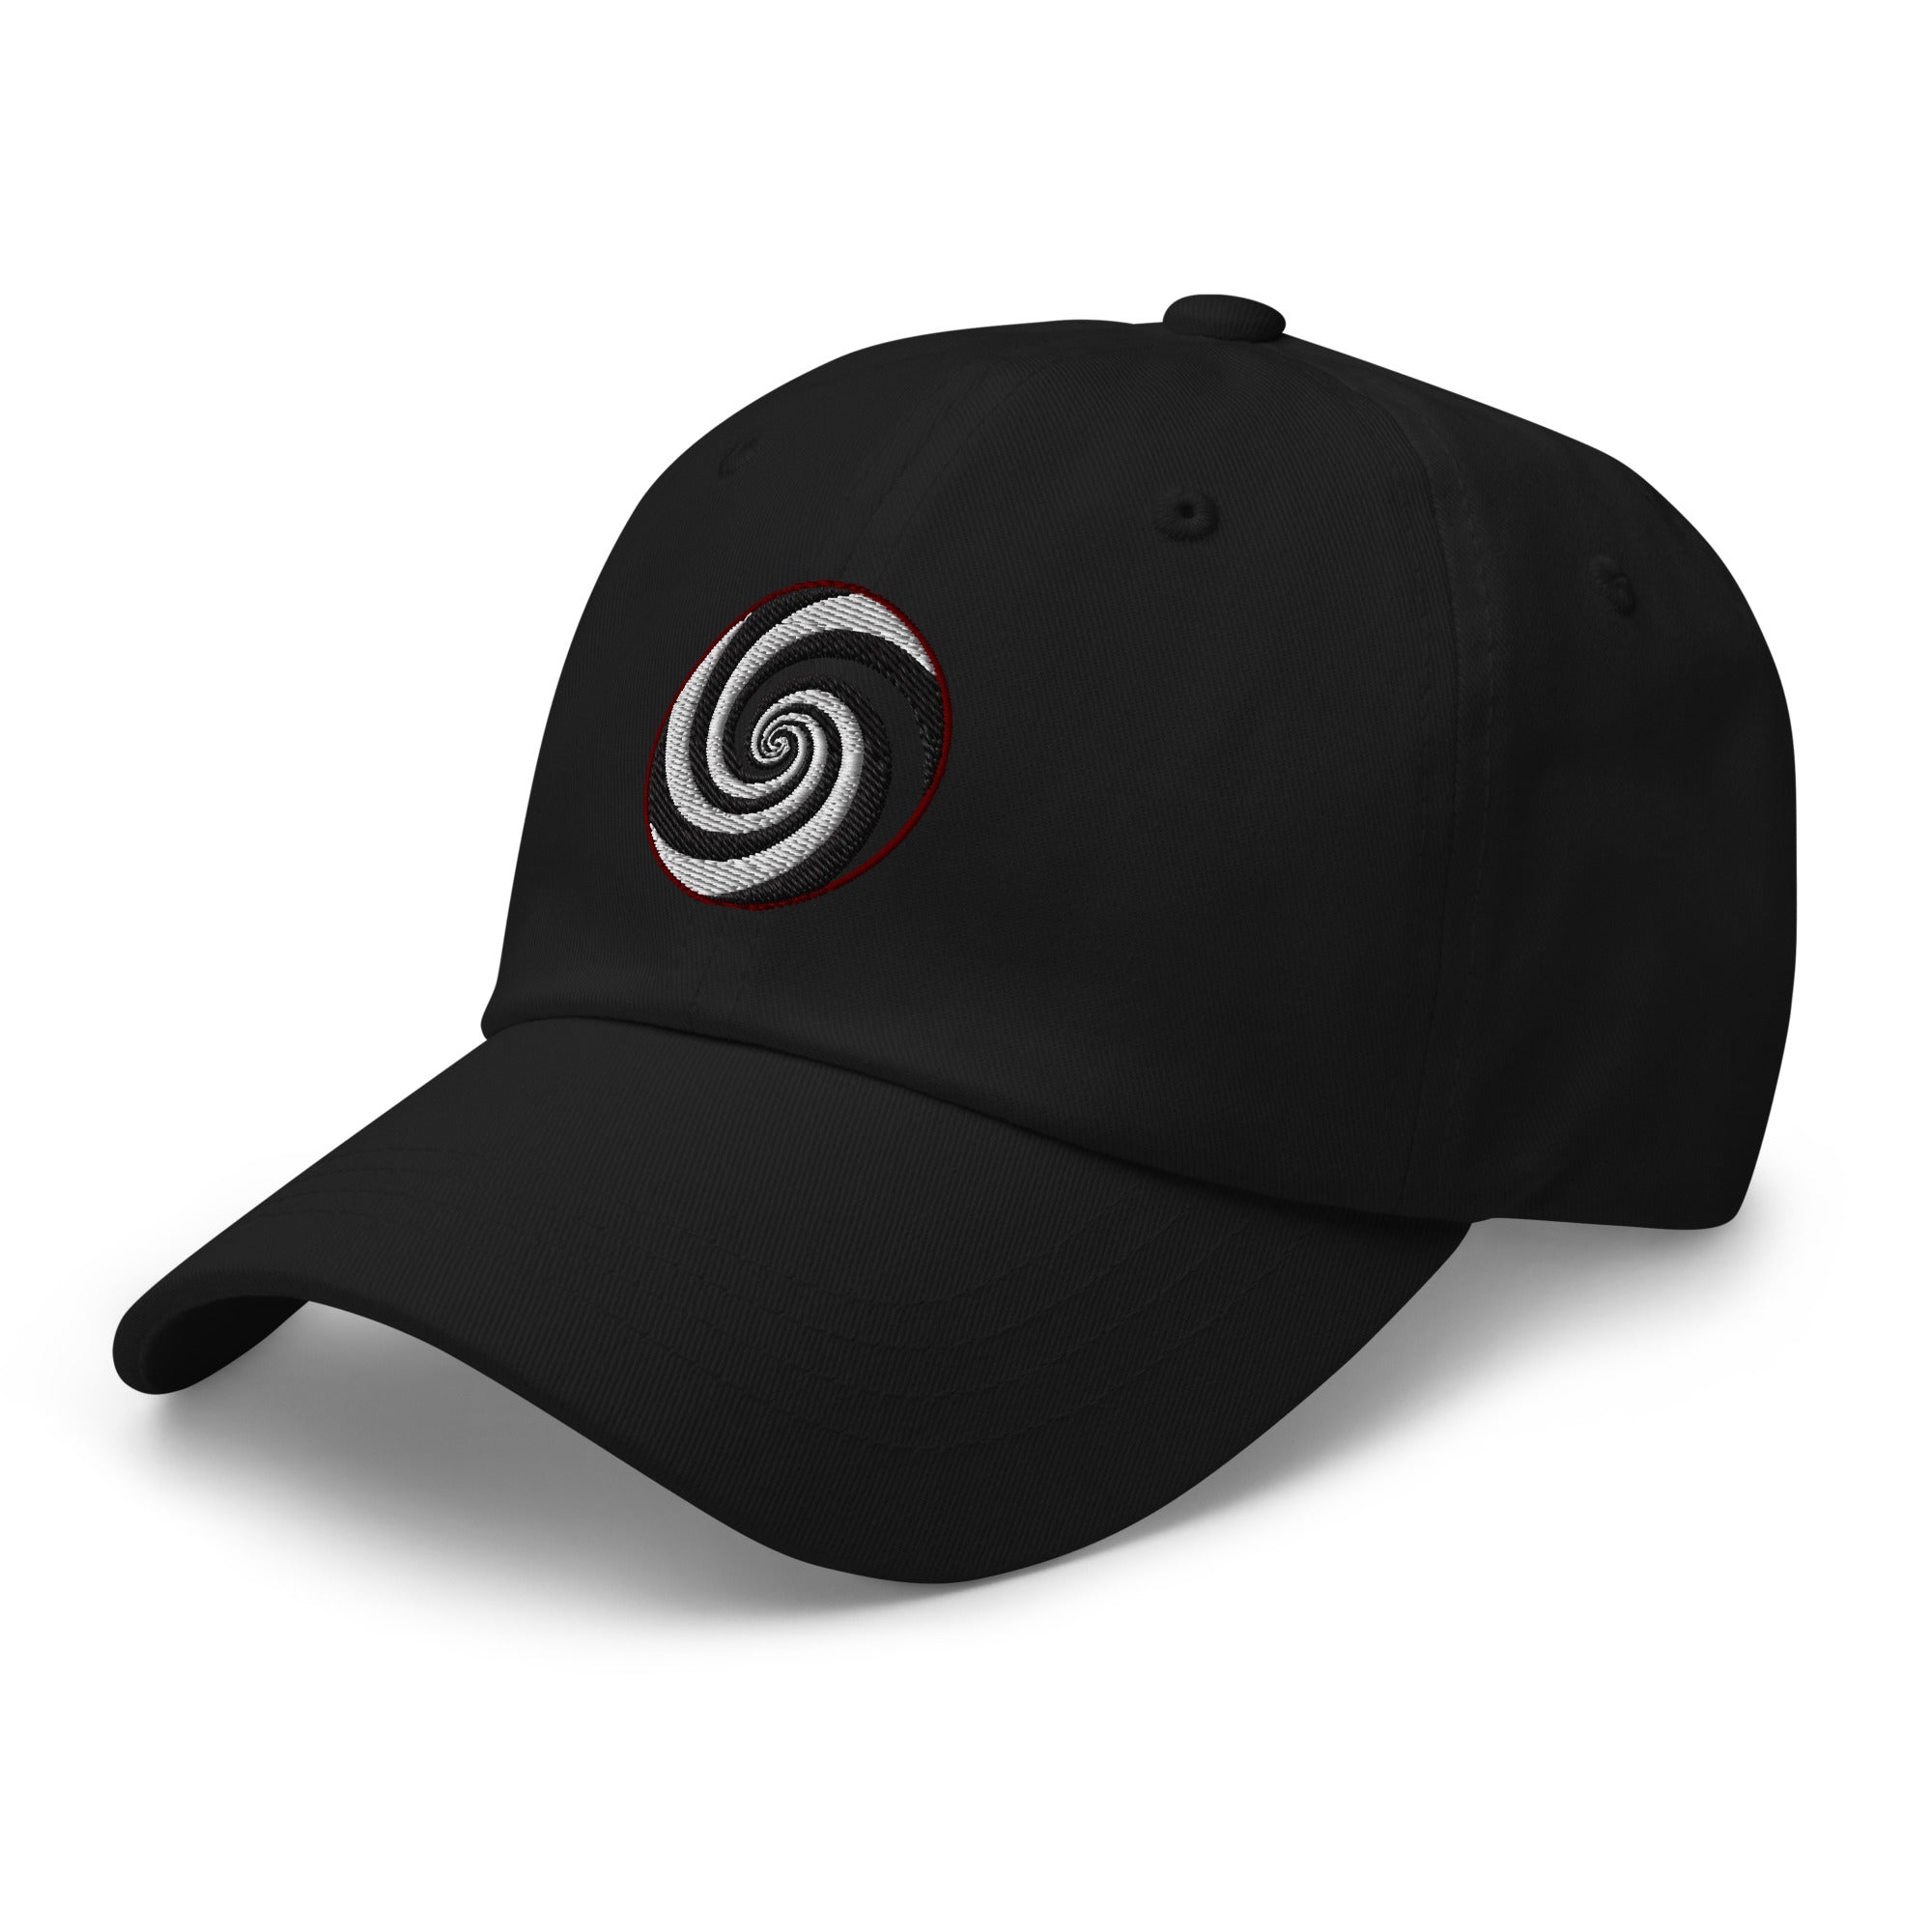 Twilight Zone Hypnotic Hypnosis Spiral Illusion Embroidered Baseball Cap Dad hat - Edge of Life Designs